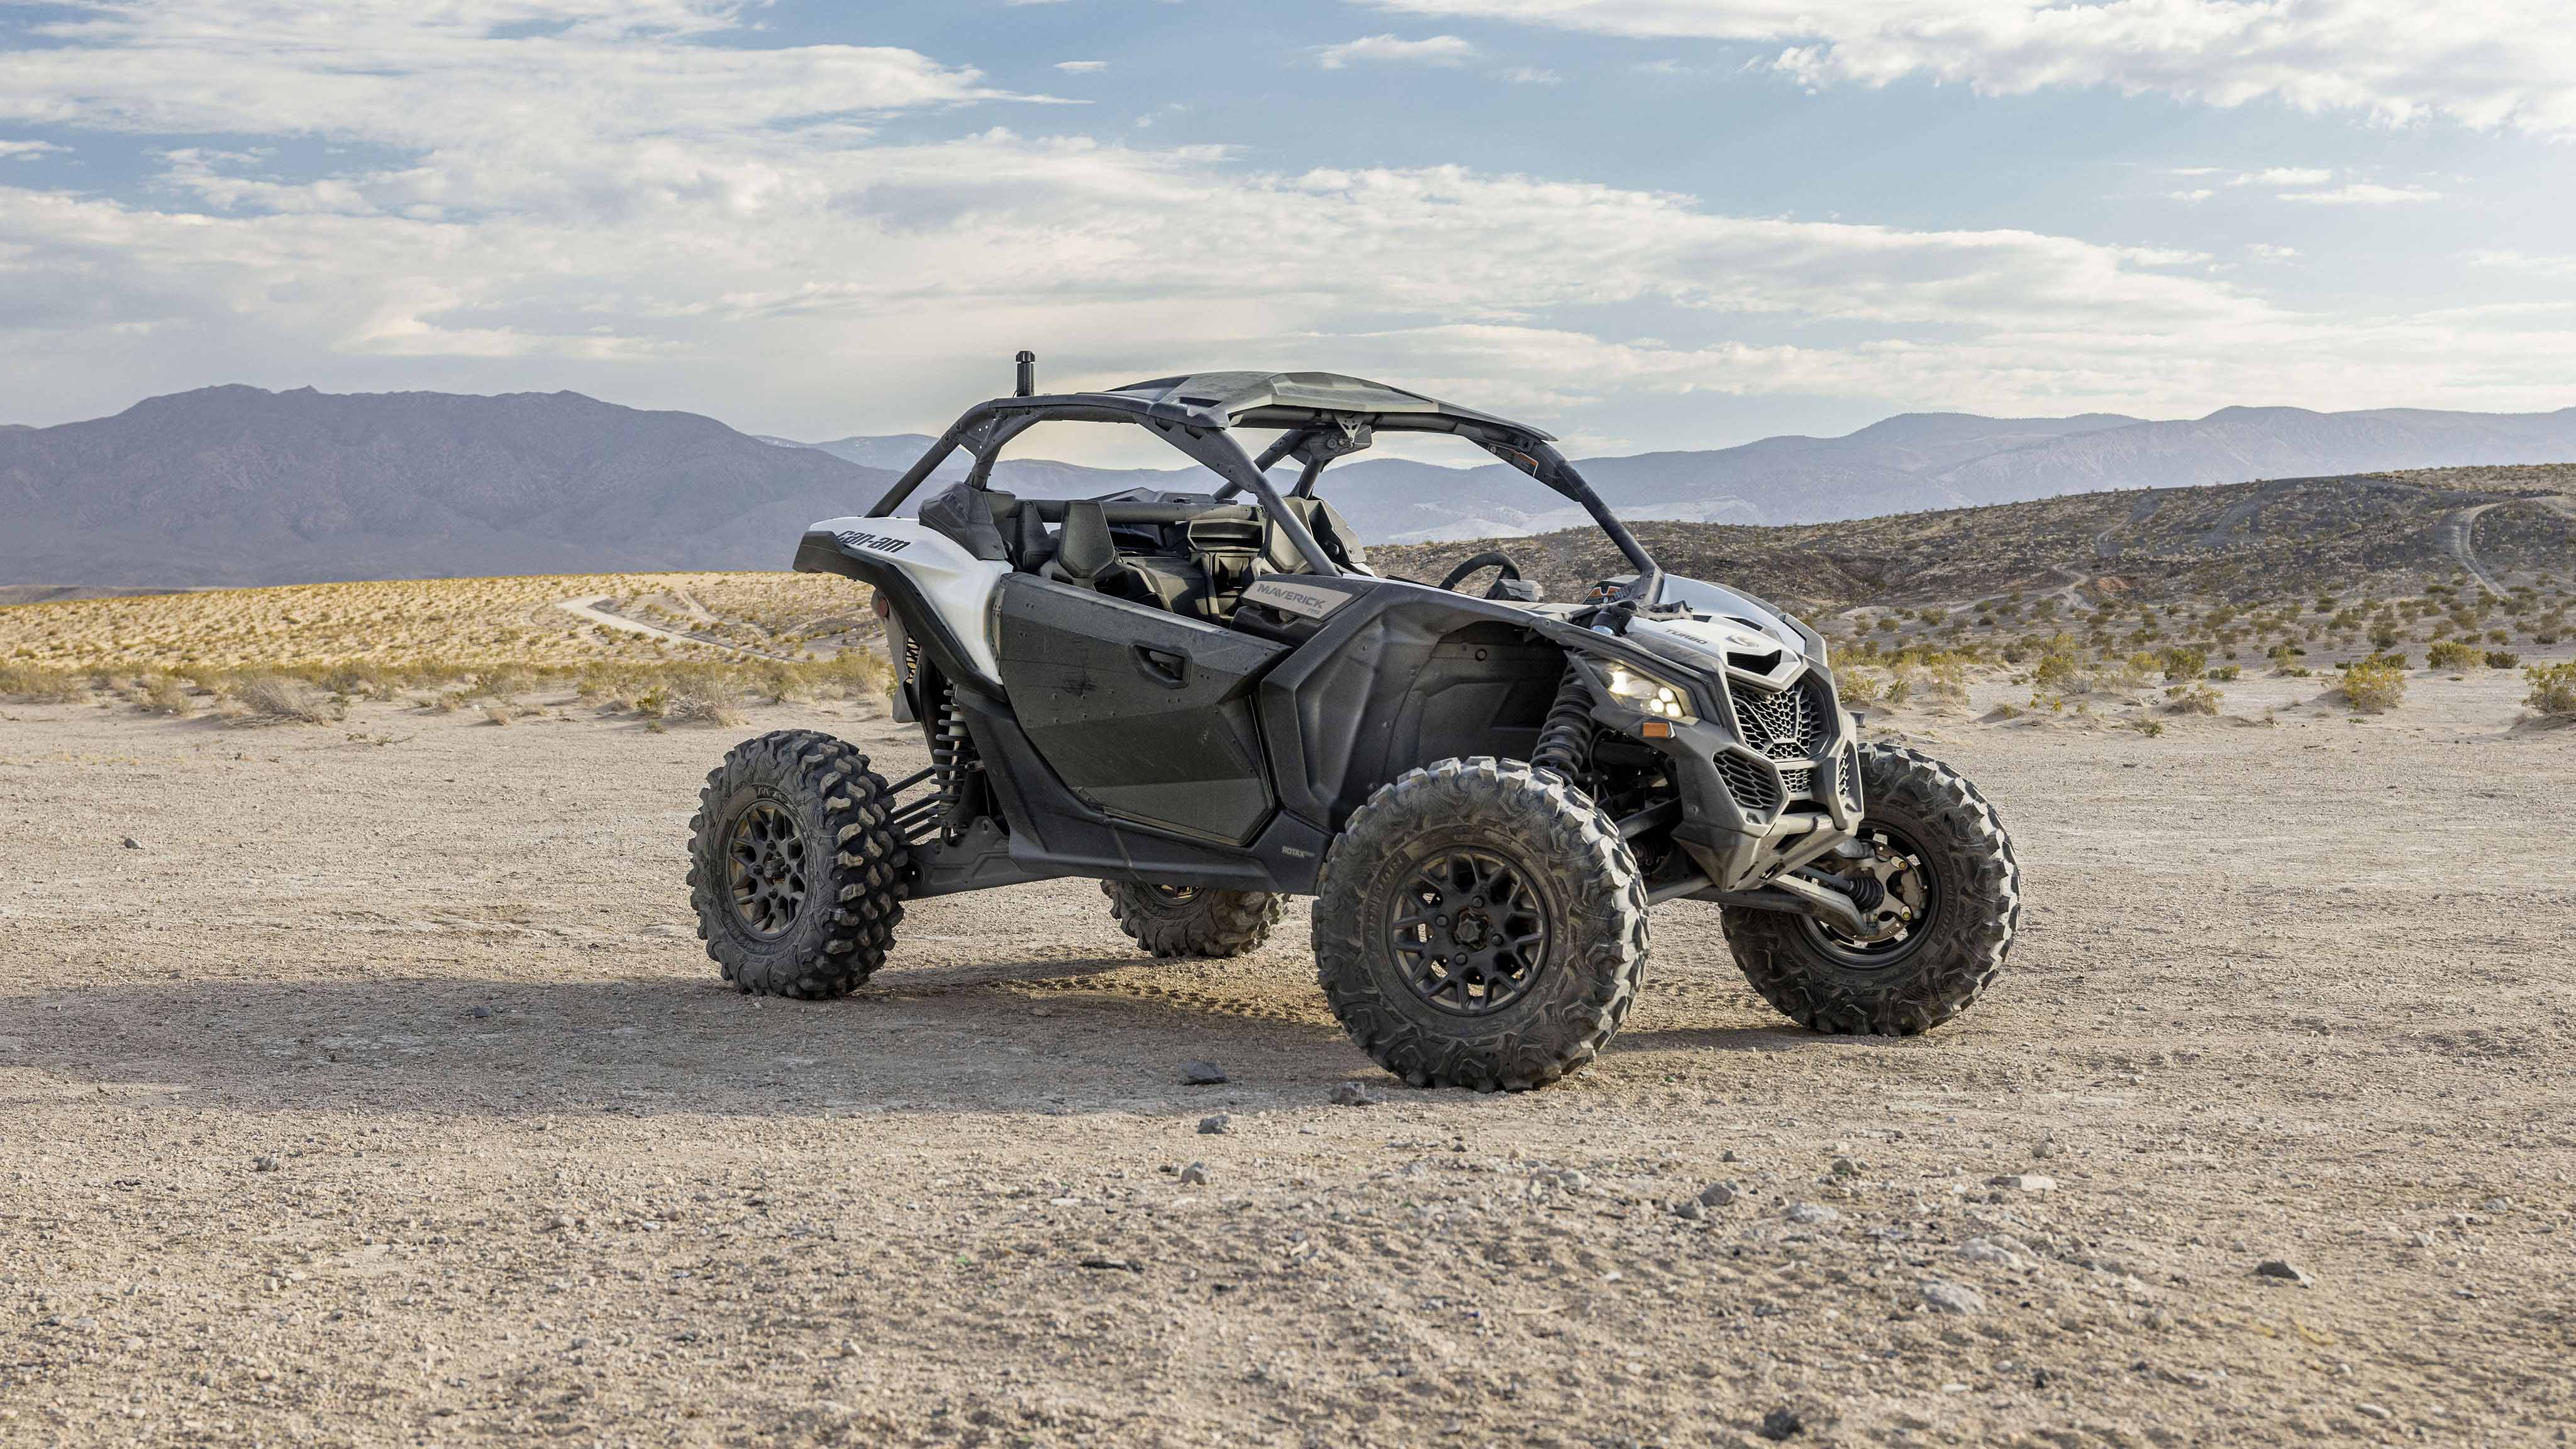 Side View of a Can-Am Maverick X3 in the desert